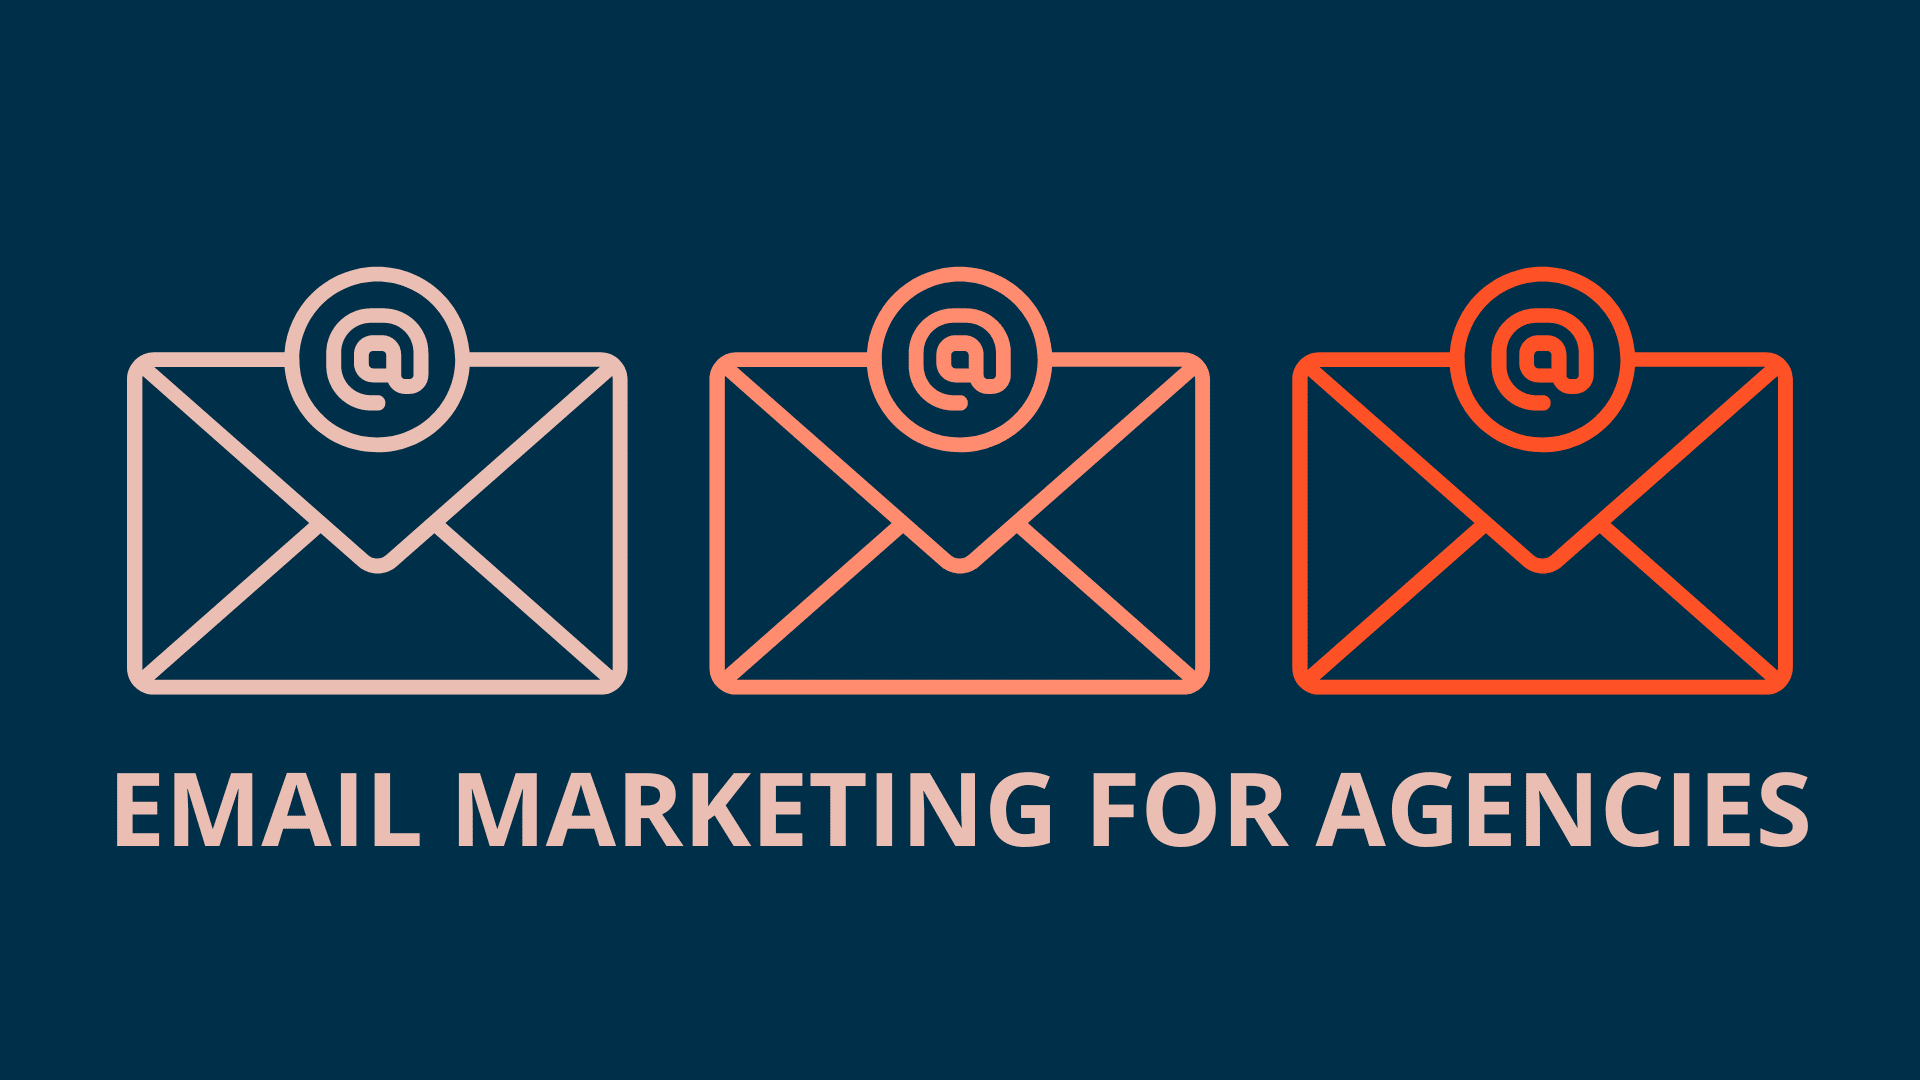 Email marketing for agencies: 4 tactics to test